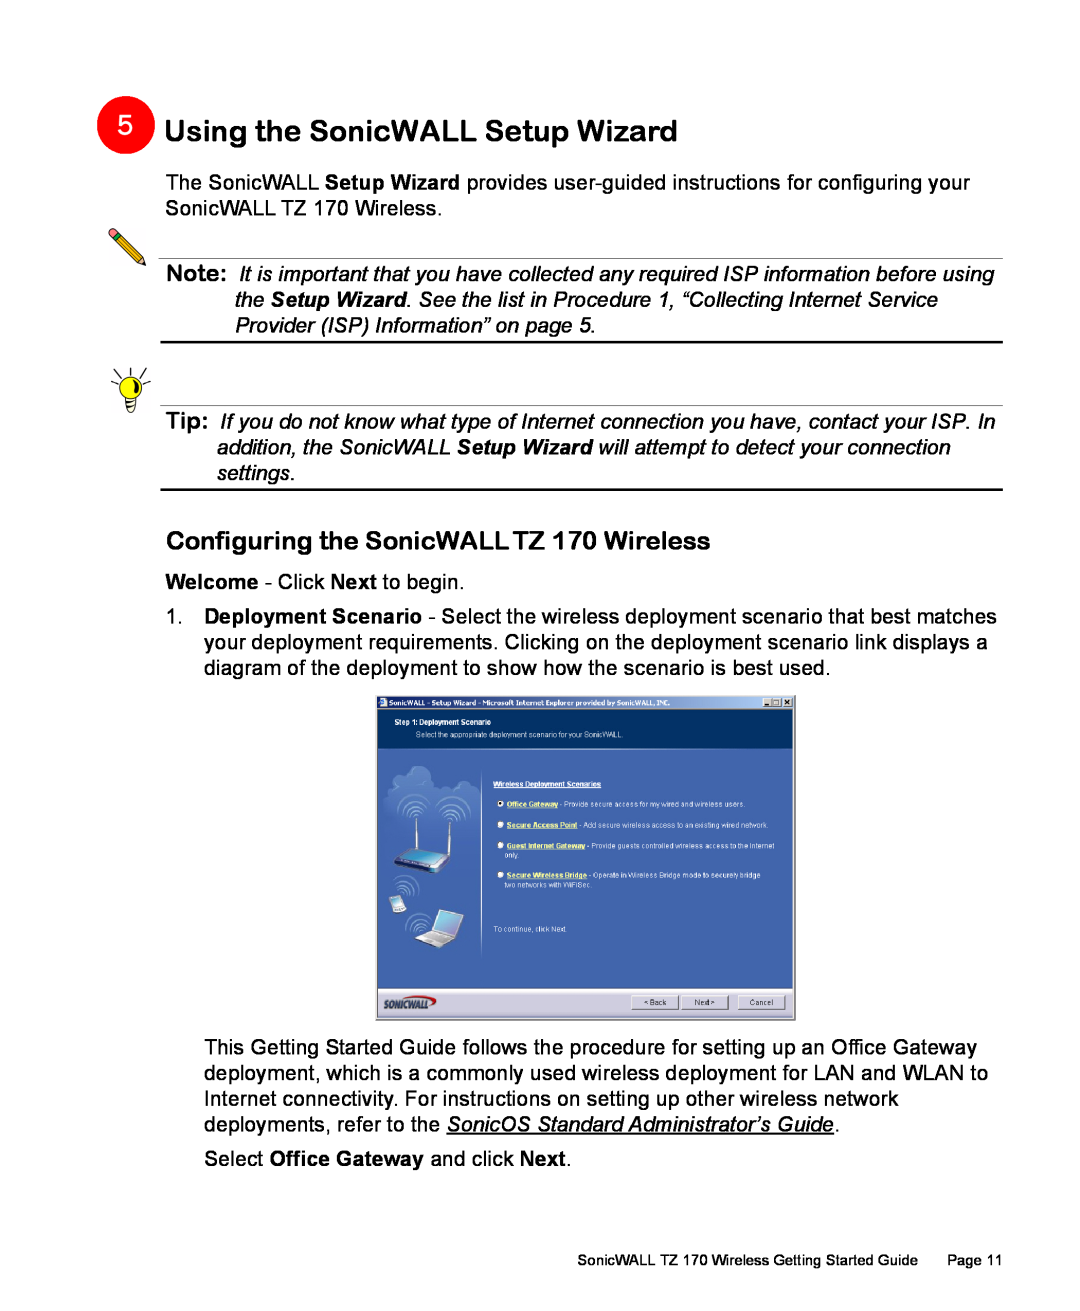 SonicWALL manual Using the SonicWALL Setup Wizard, Configuring the SonicWALL TZ 170 Wireless 